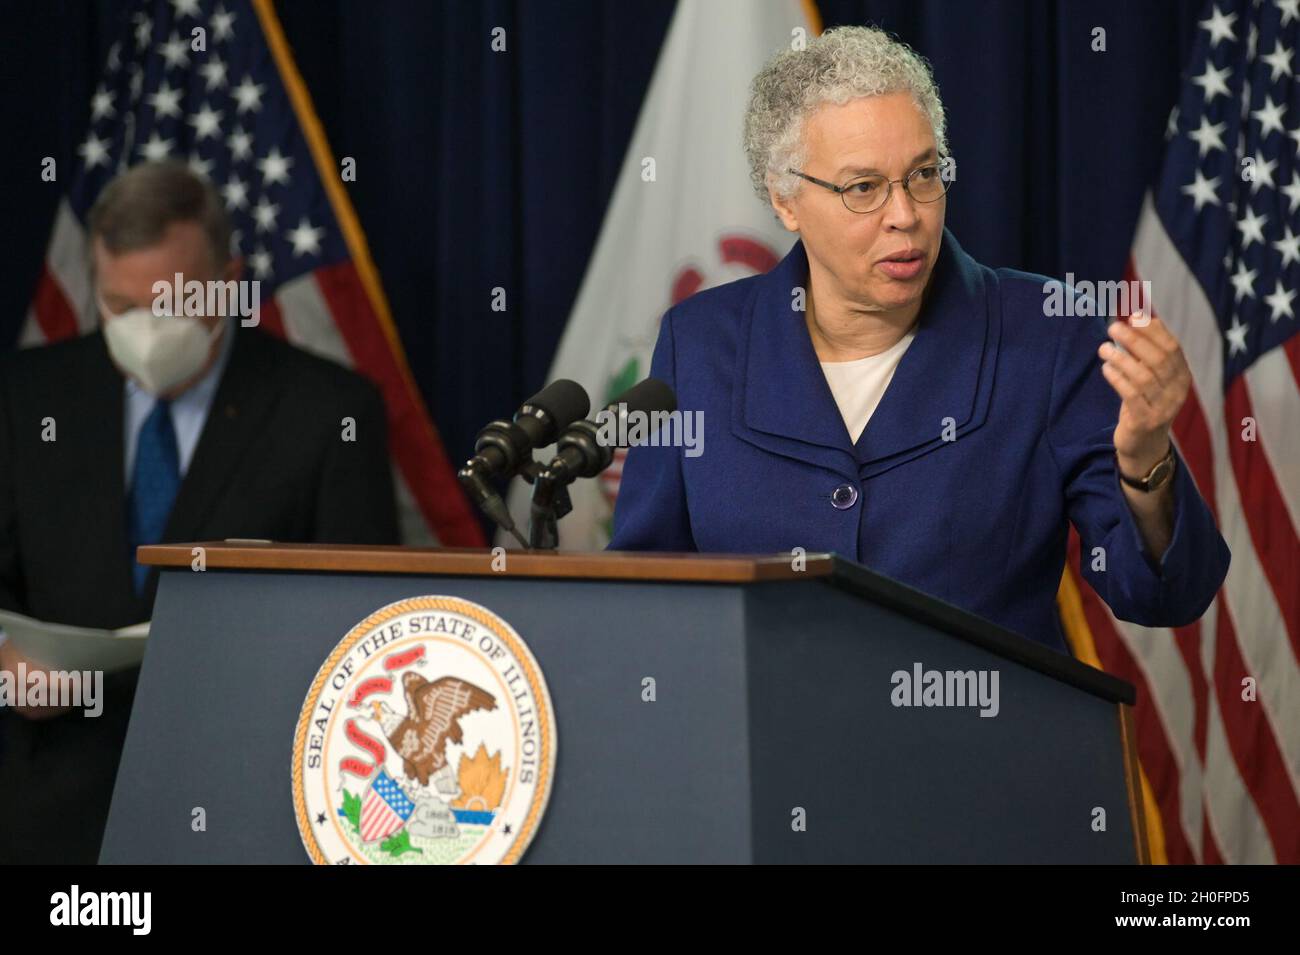 Cook County President Toni Preckwinkle speaks during a press conference held in the James R. Thompson Center, Chicago, Illinois, February 26, 2021. Preckwinkle gave her support of the U.S. Army operated vaccination site planned to open in Cook County, Illinois. Stock Photo